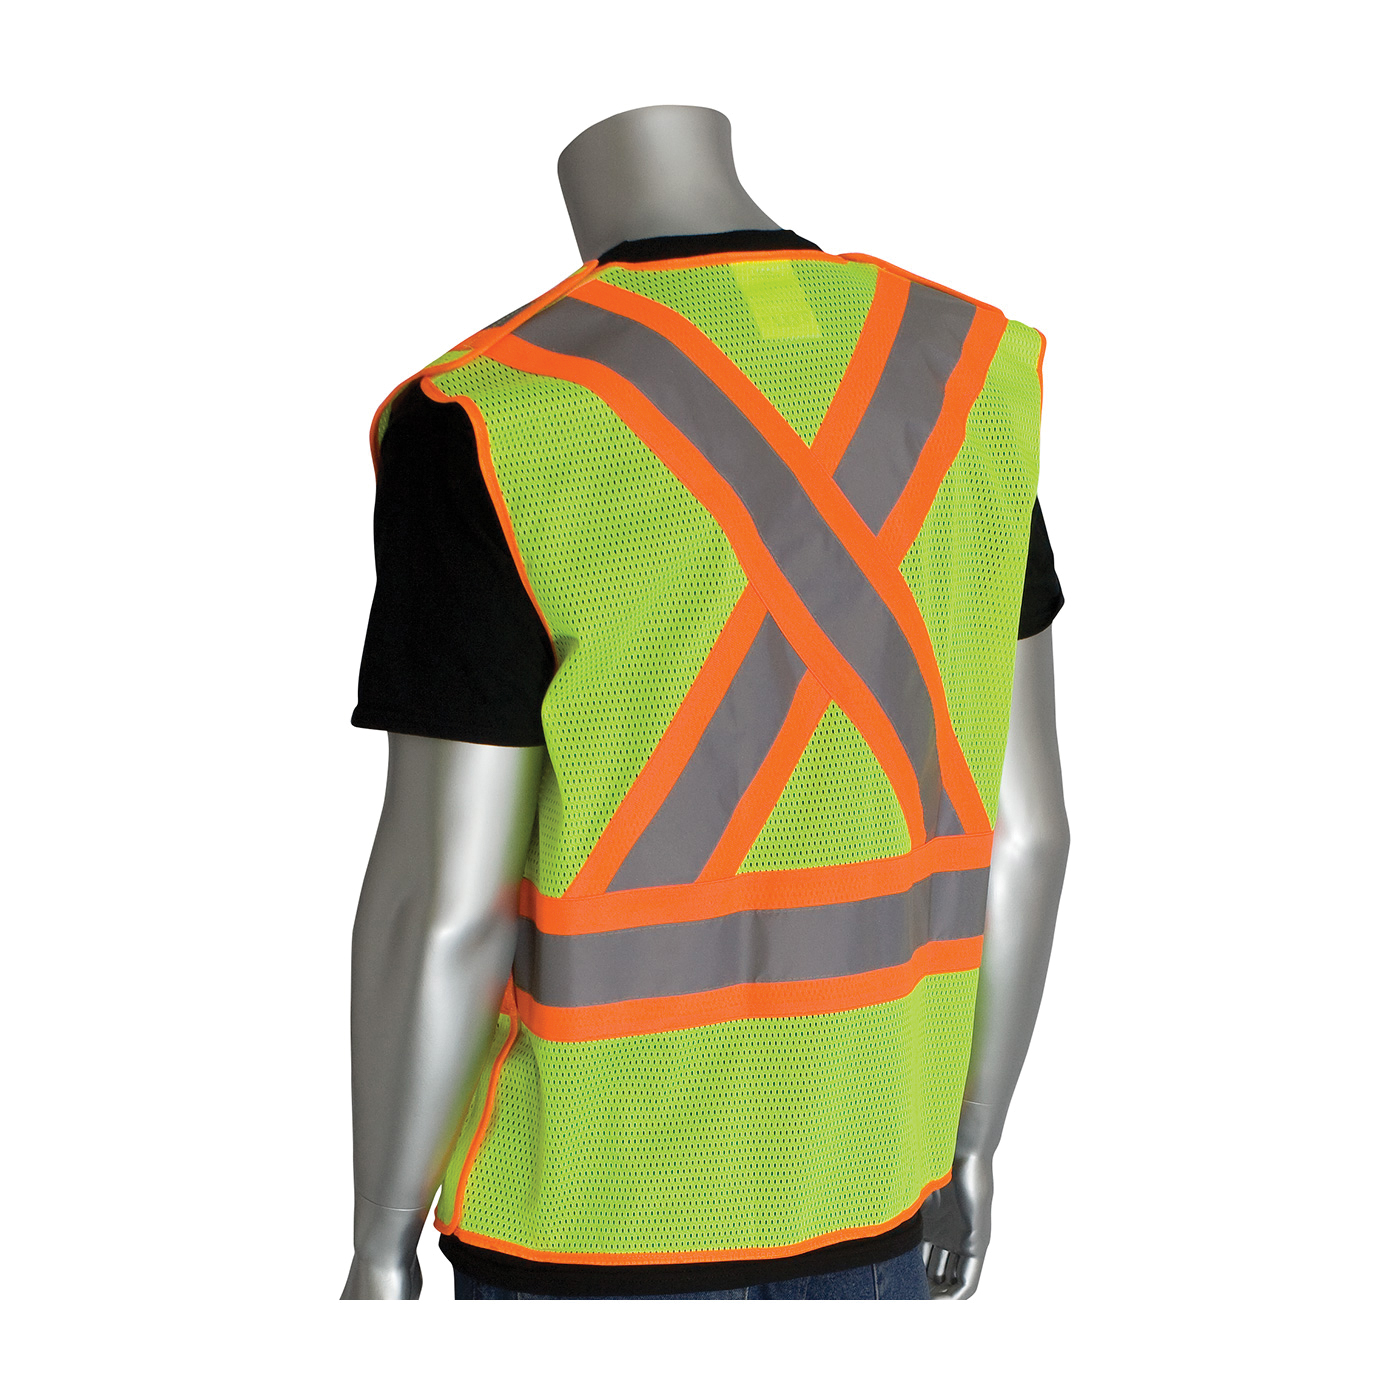 PIP® 302-0211-LY 2-Tone X-Back Safety Vest, Hi-Viz Lime Yellow, Polyester Mesh, Hook and Loop Closure, 5 Pockets, ANSI Class: Class 2, Specifications Met: ANSI 107 Type R, CAN/CSA Z96